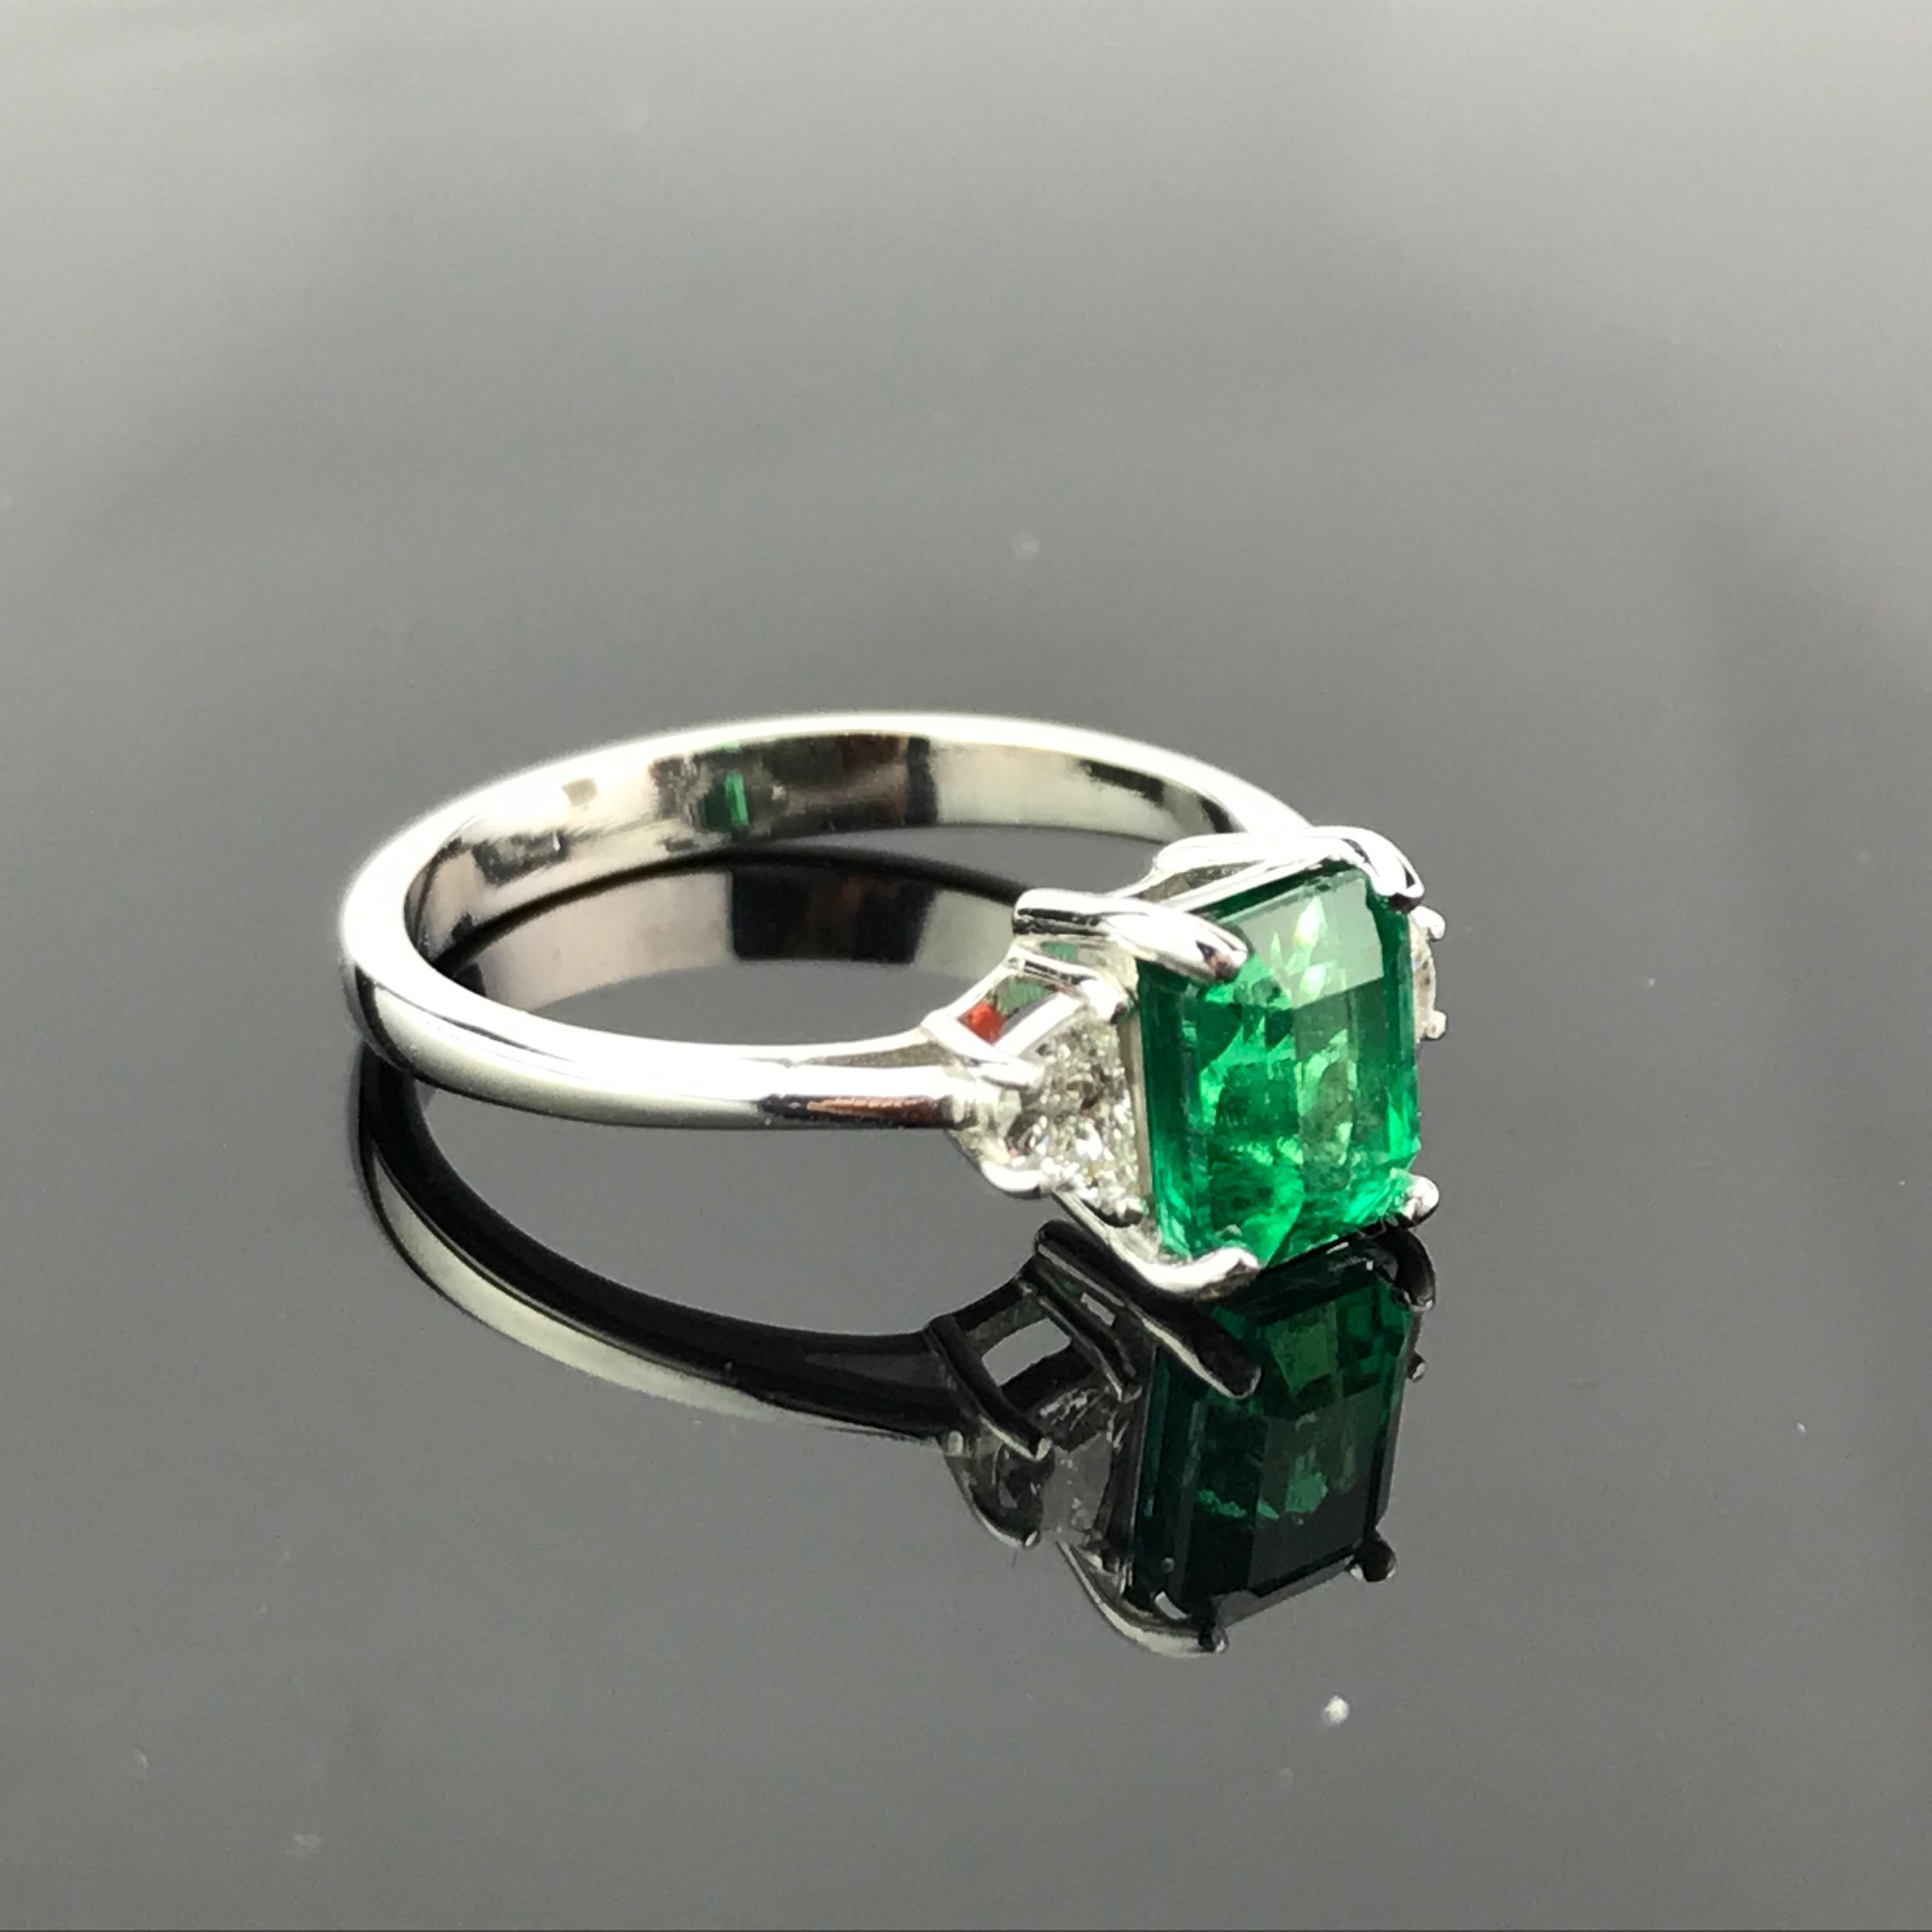 A classic three stone ring, with a 1.48 carat high quality and great colour emerald cut Zambian Emerald centre stone, and 2 half-moon 0.24 carat side stone Diamonds all set in 3.32 grams of 18K White Gold. Currently a ring size US 6, but we can